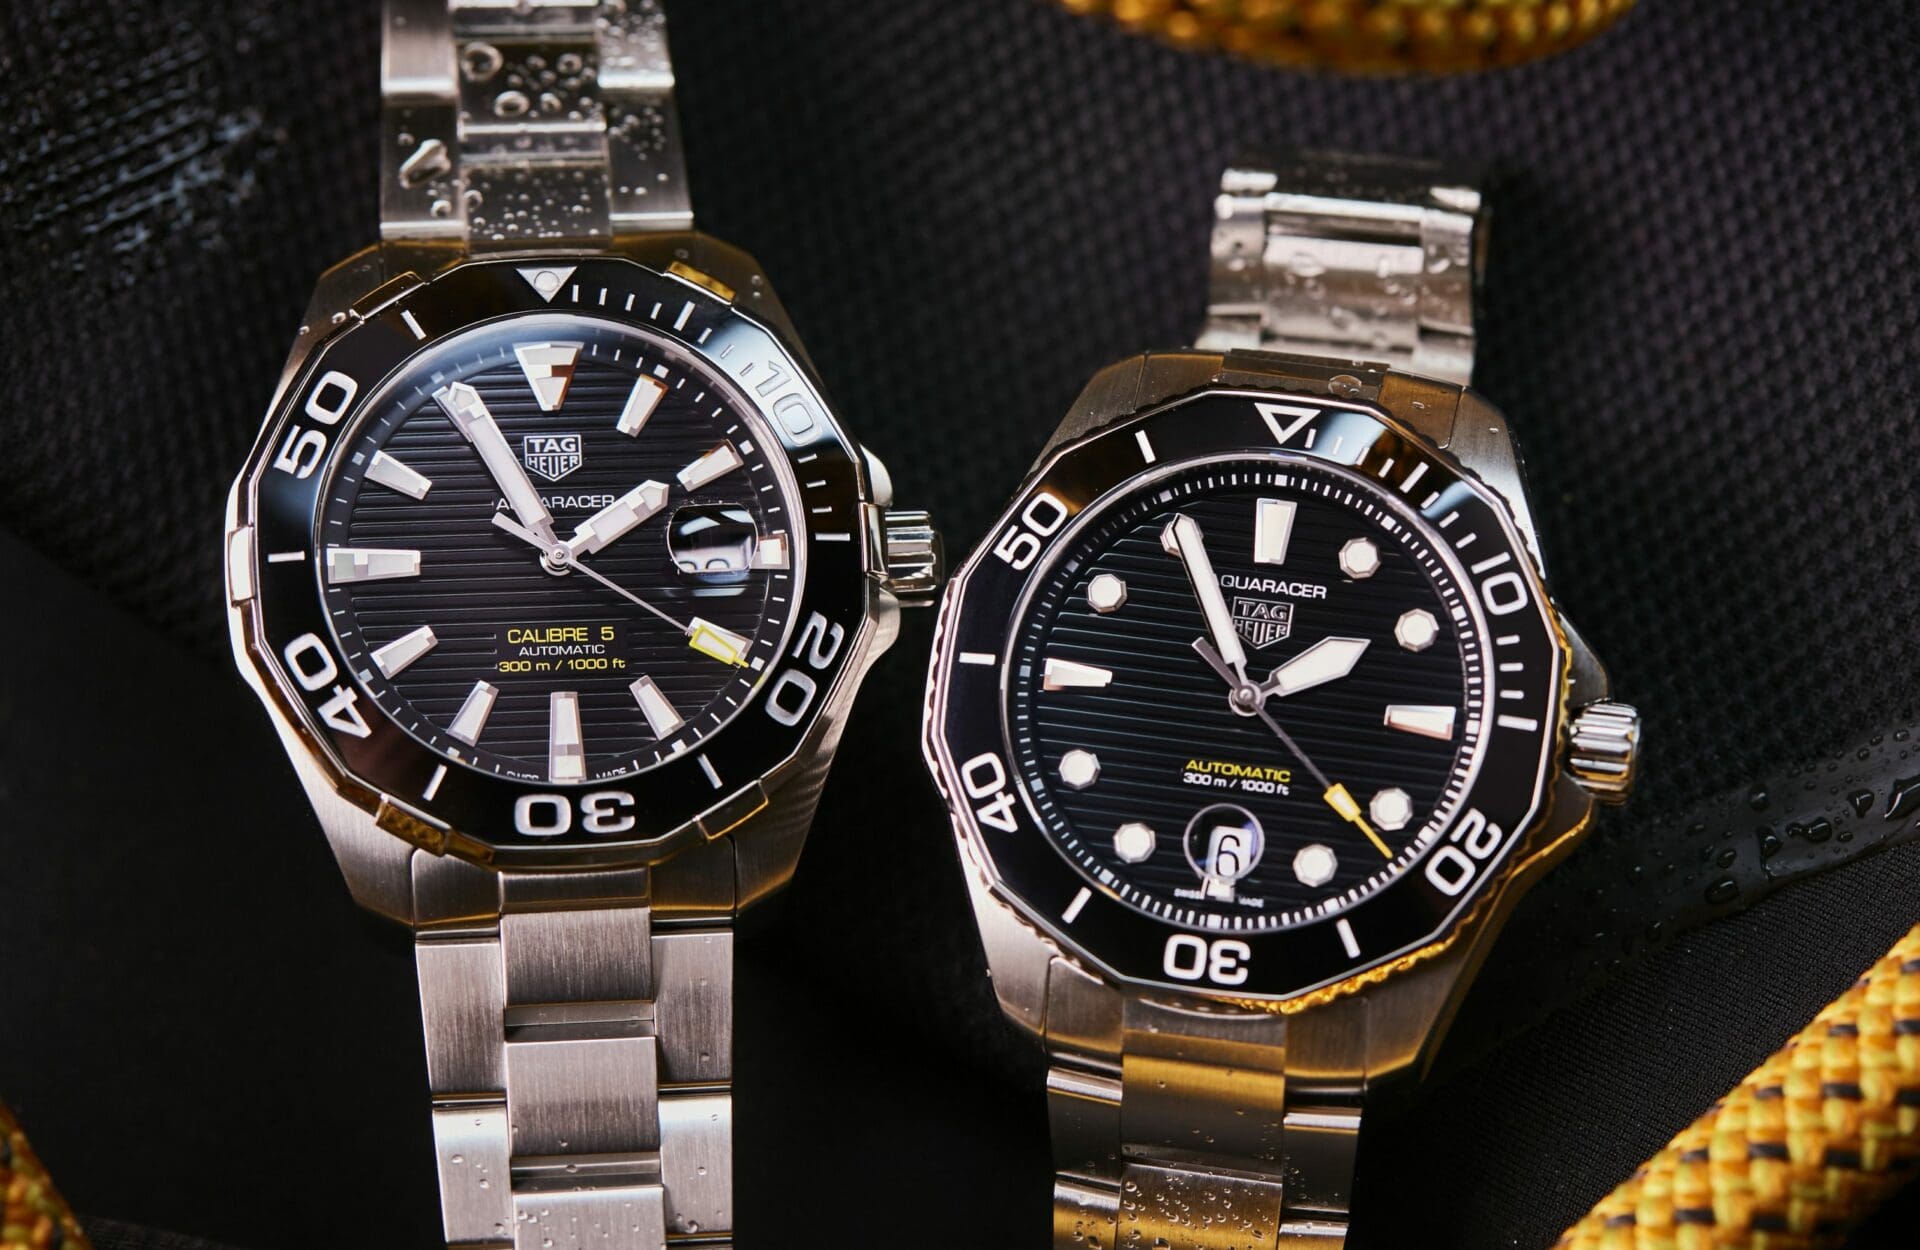 VIDEO: 14 differences between the old and new TAG Heuer Aquaracer collection